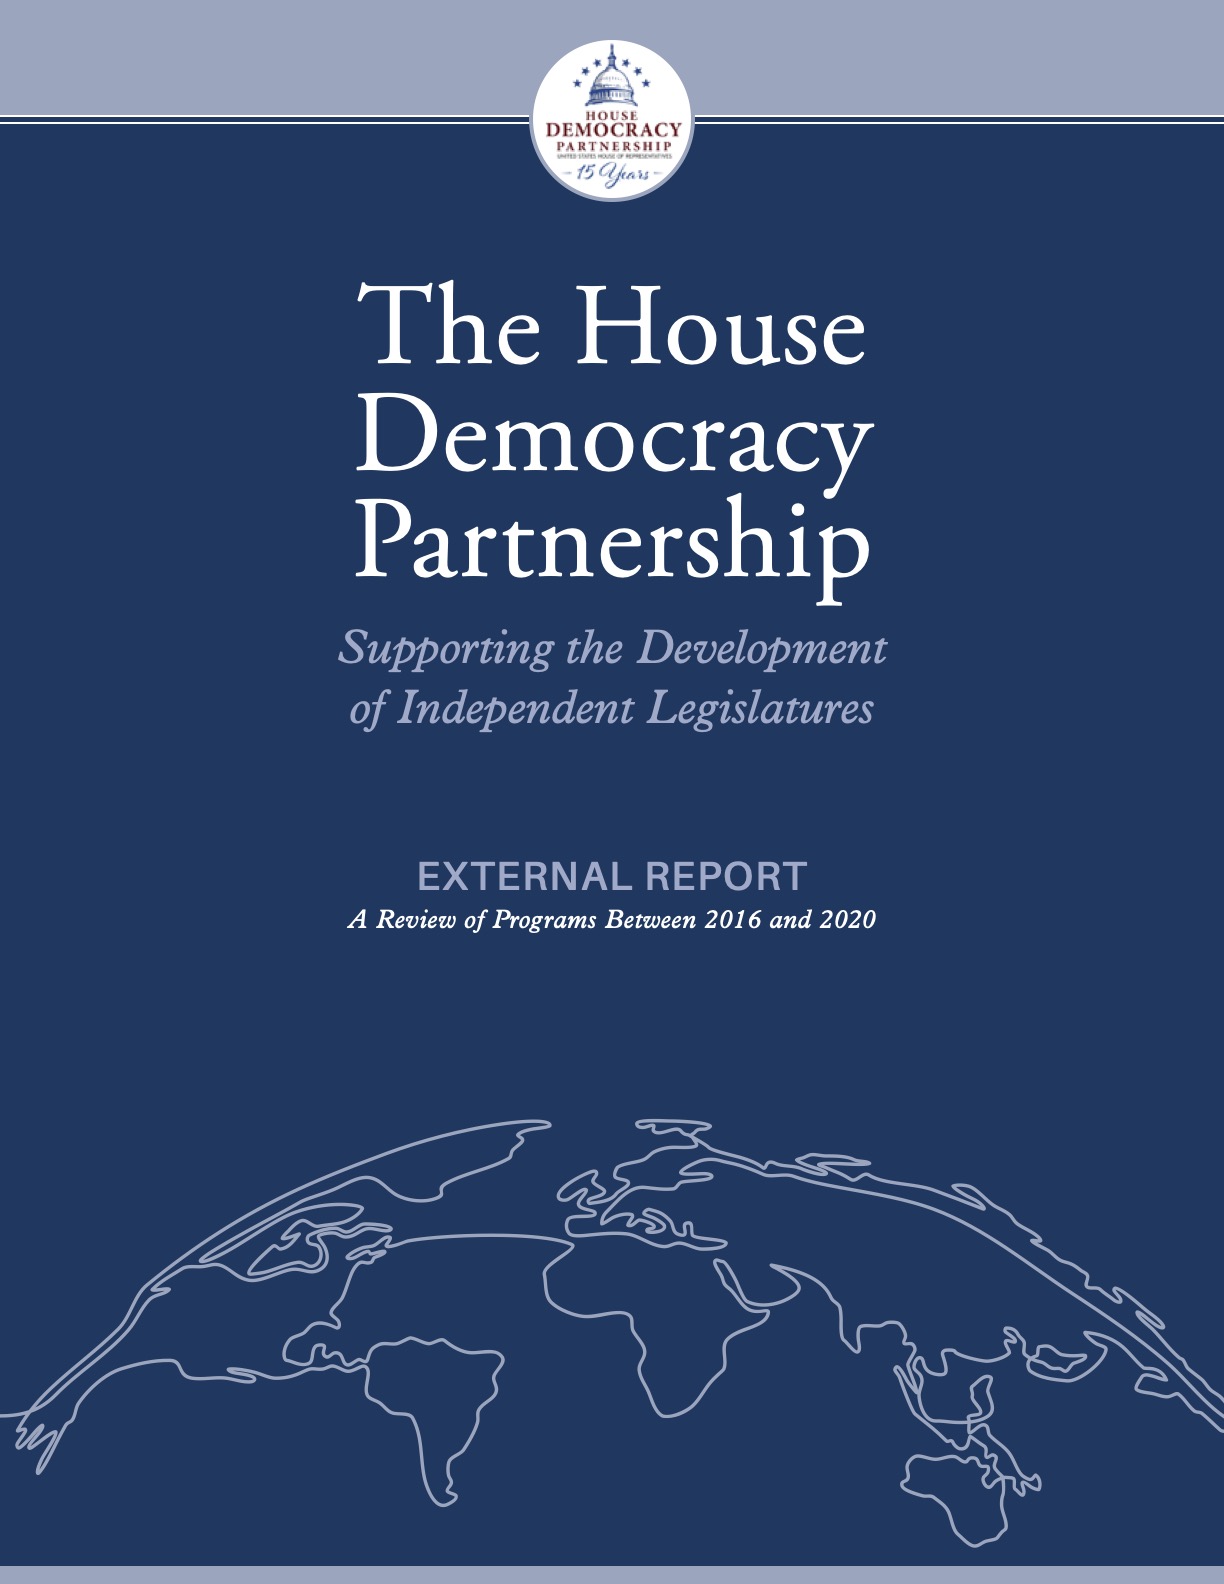 Cover page for the House Democracy Project External Report on Supporting the Development of Independent Legislatures